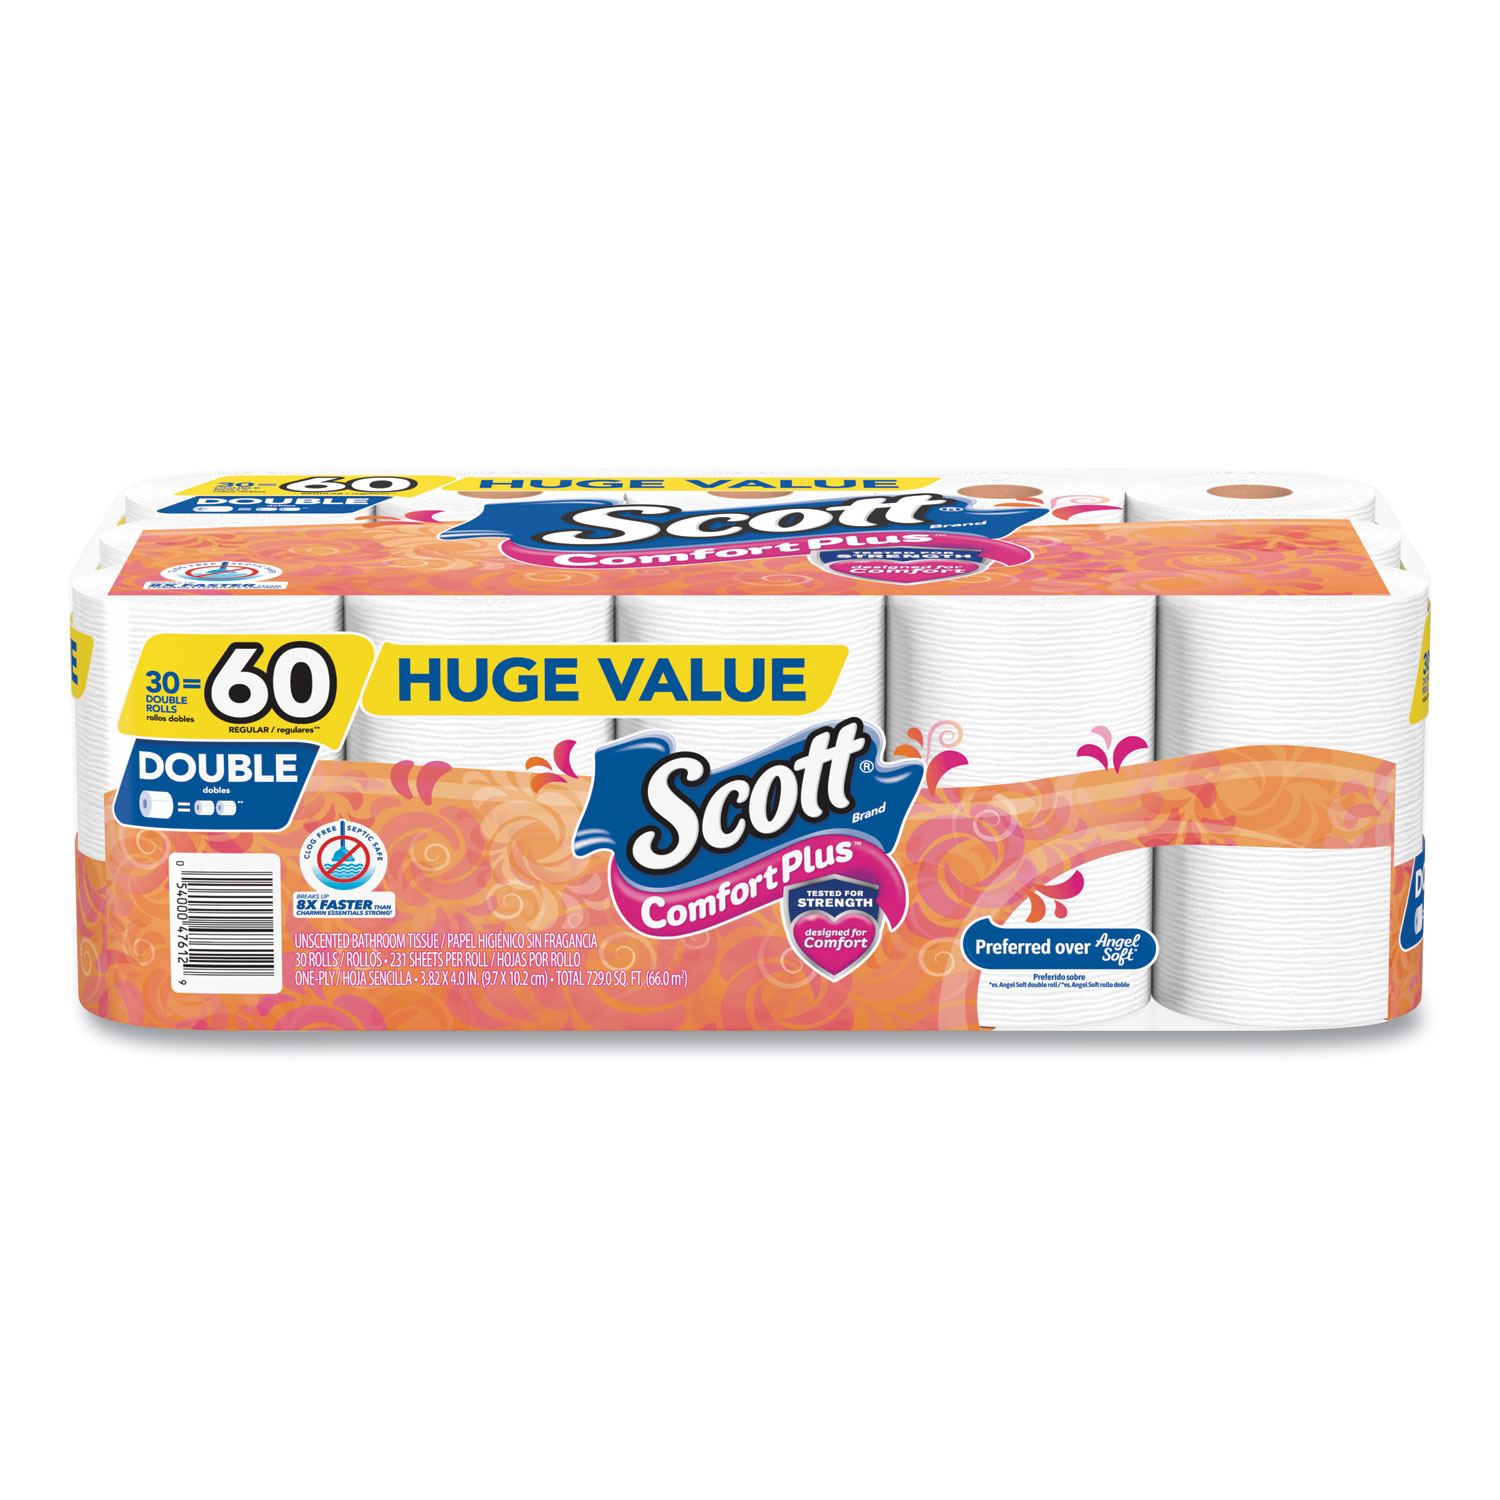  Scott 47612 ComfortPlus Toilet Paper, Double Roll, Bath Tissue, Septic Safe, 1-Ply, White, 231 Sheets/Roll, 30 Rolls/Pack (KCC47612) 